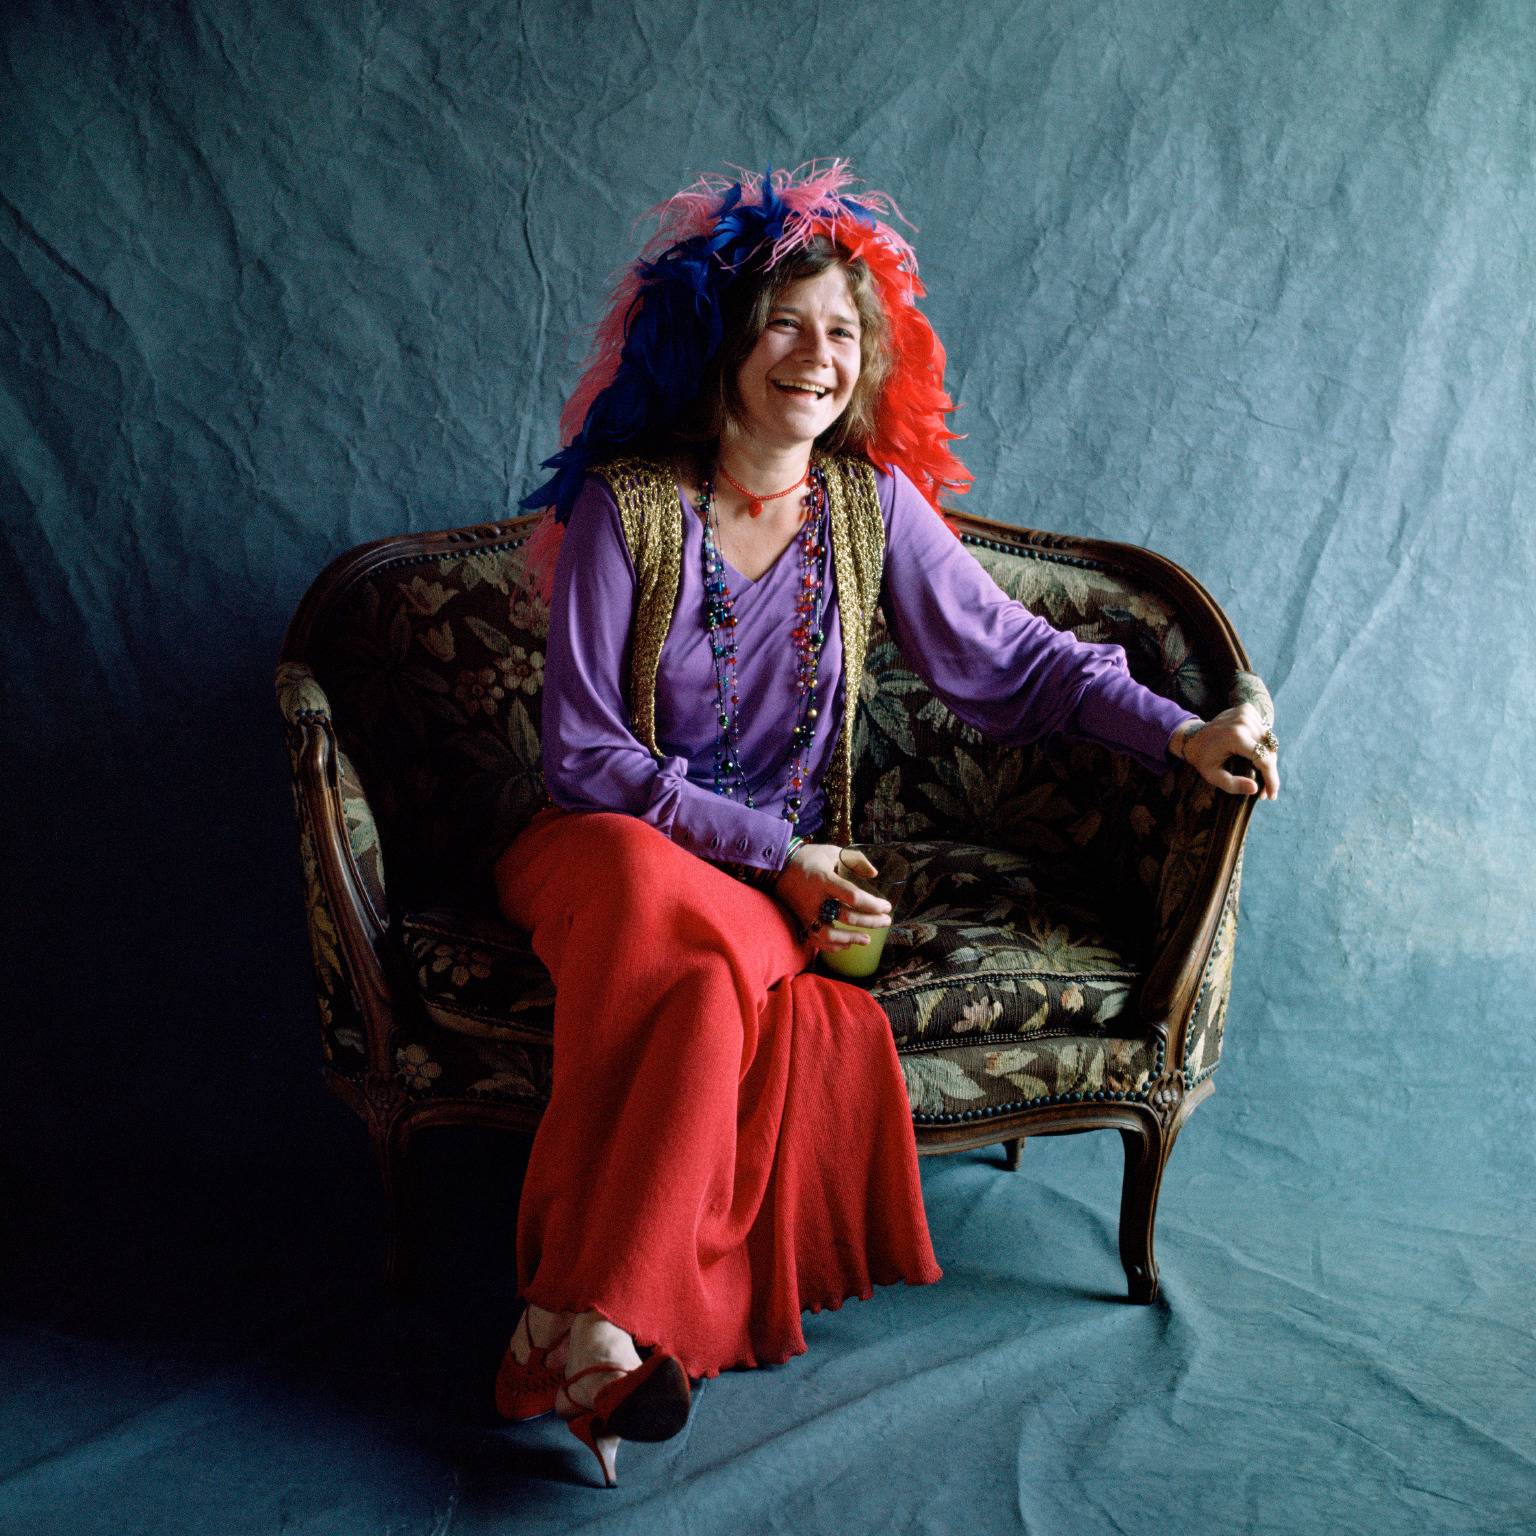 Janis Joplin sat on a chair laughing